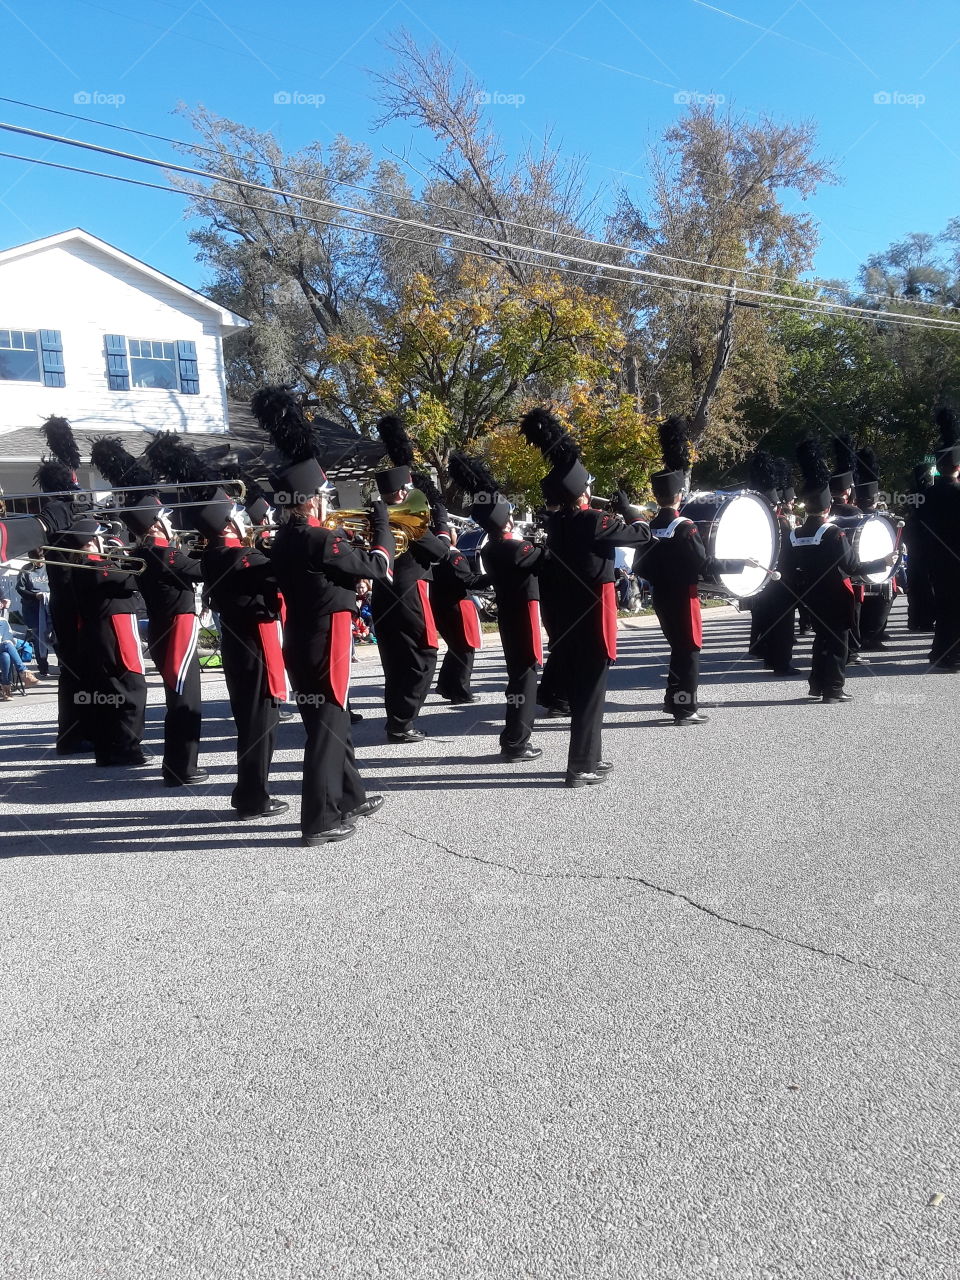 Marching Band In Parade